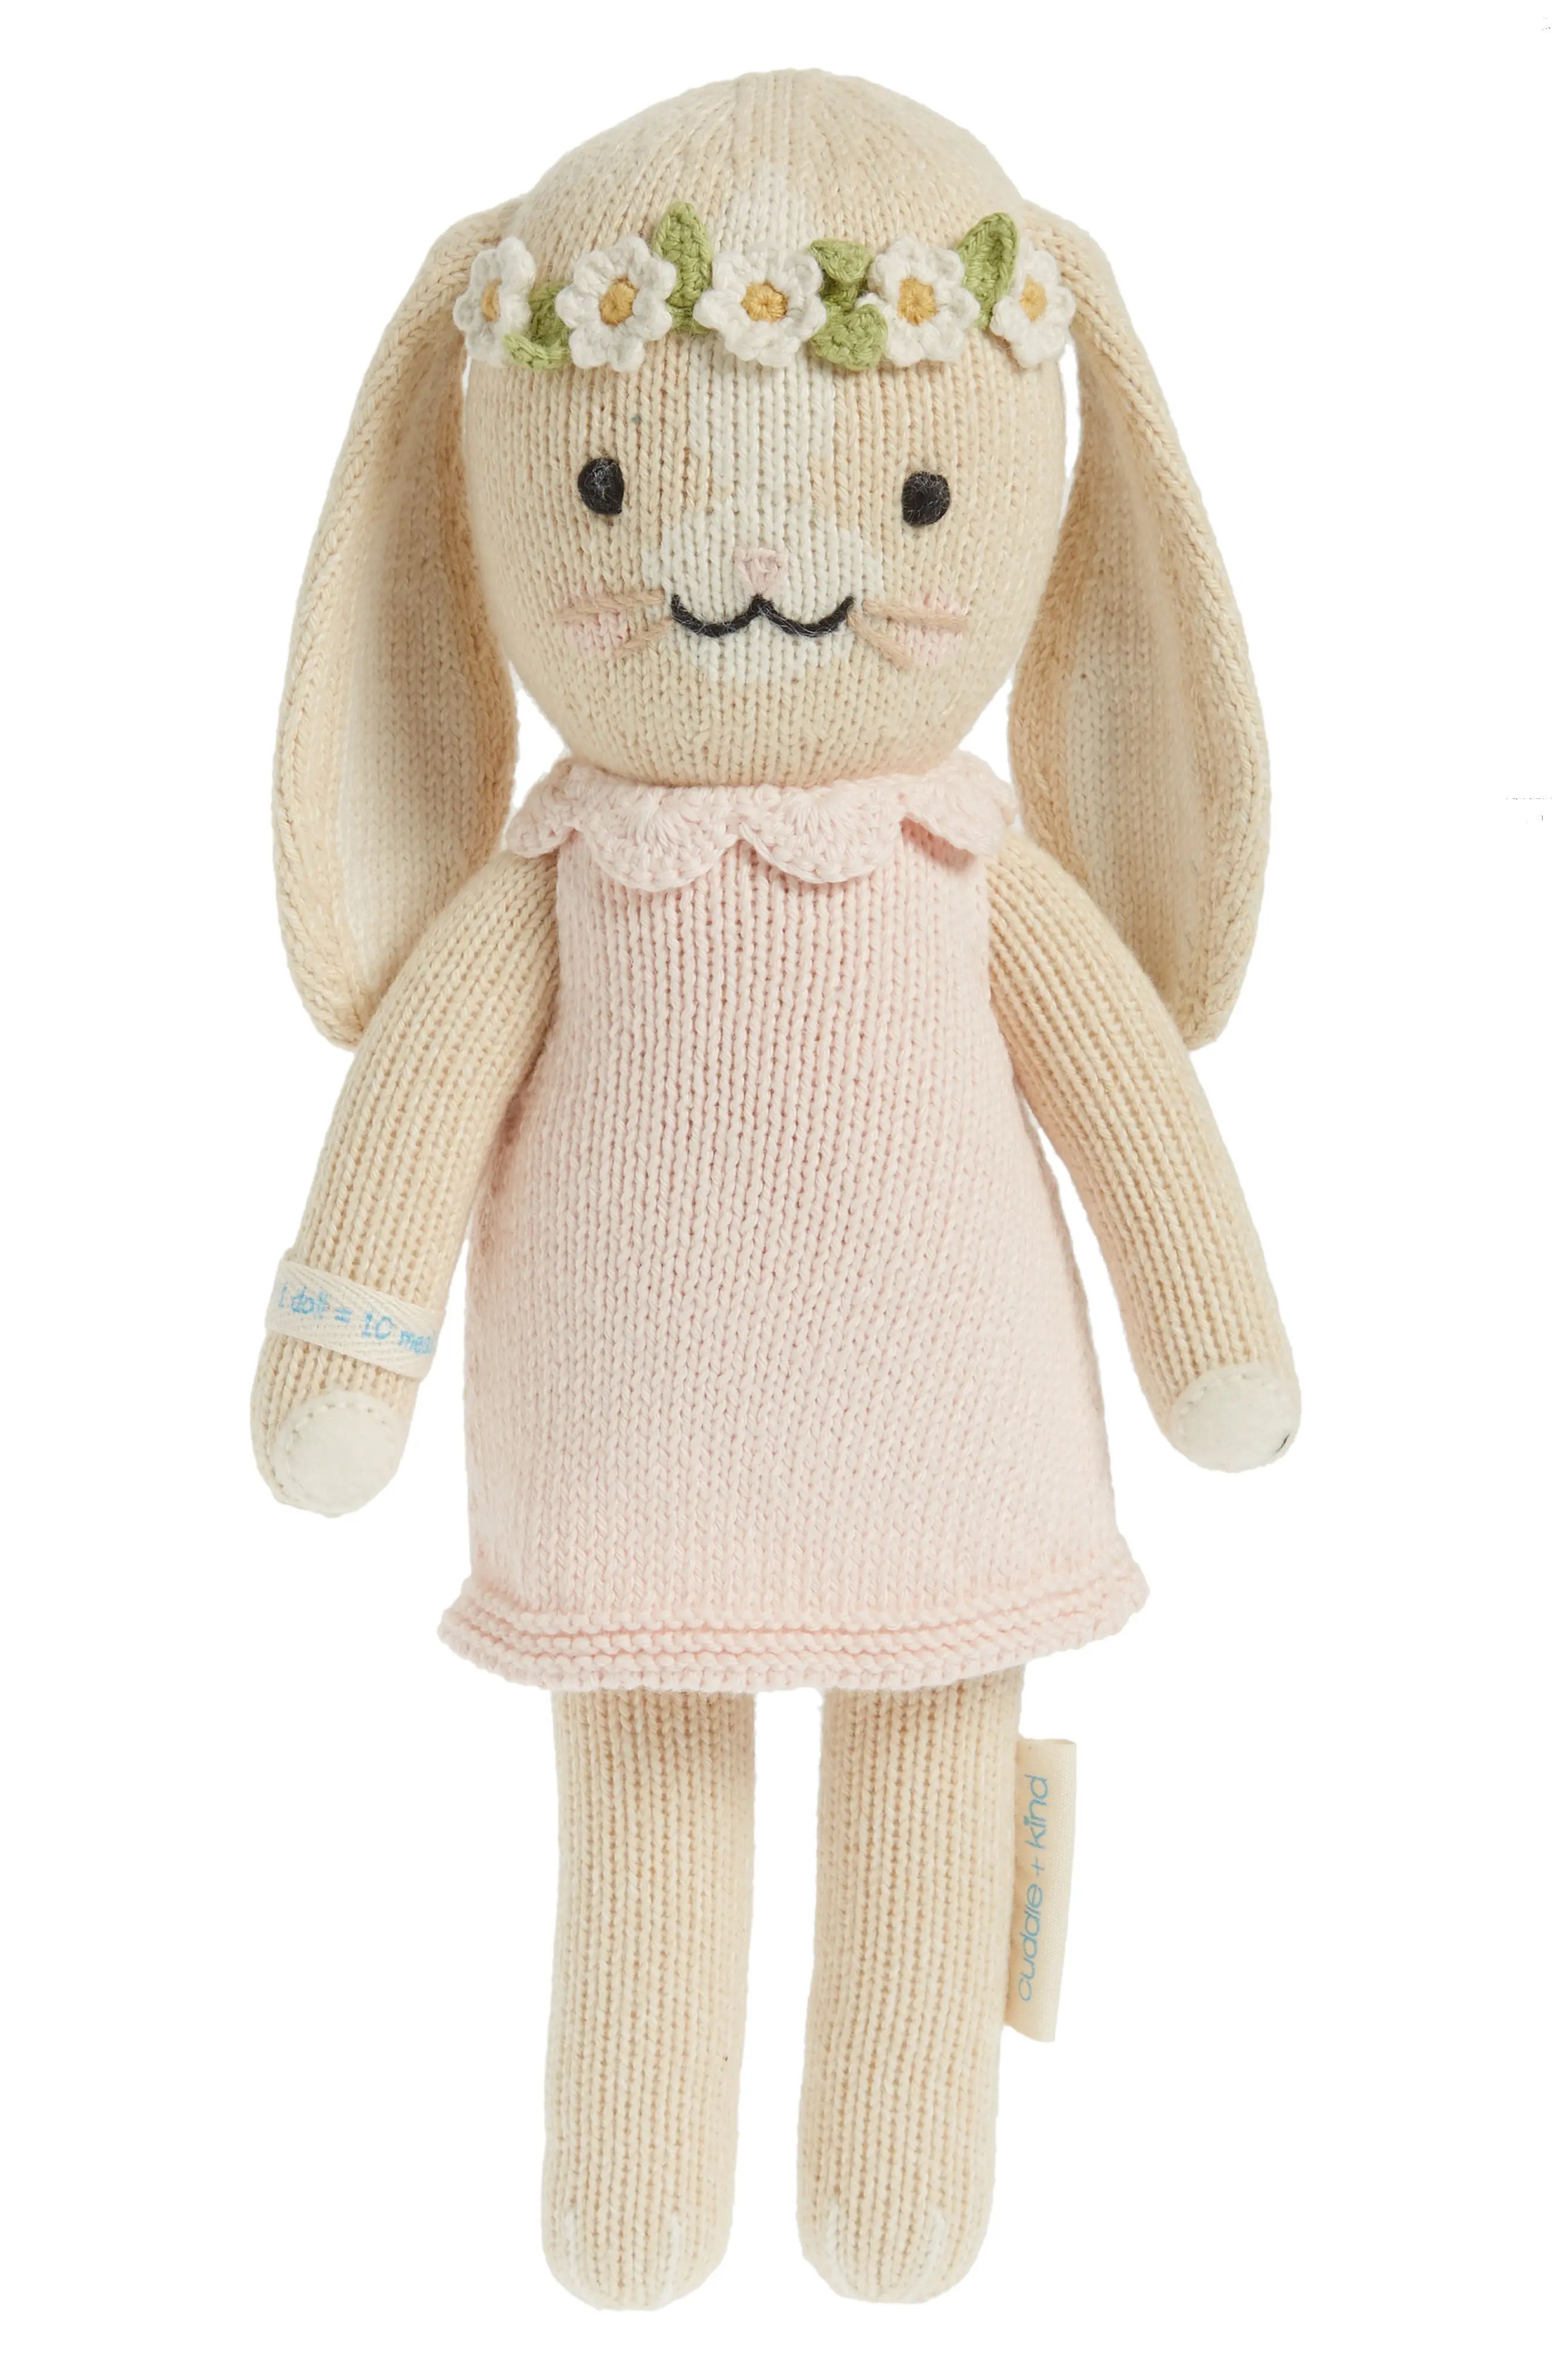 cuddle+kind cuddle + kind Mini Blush Hannah the Bunny Stuffed Animal in Pink at Nordstrom | Nordstrom